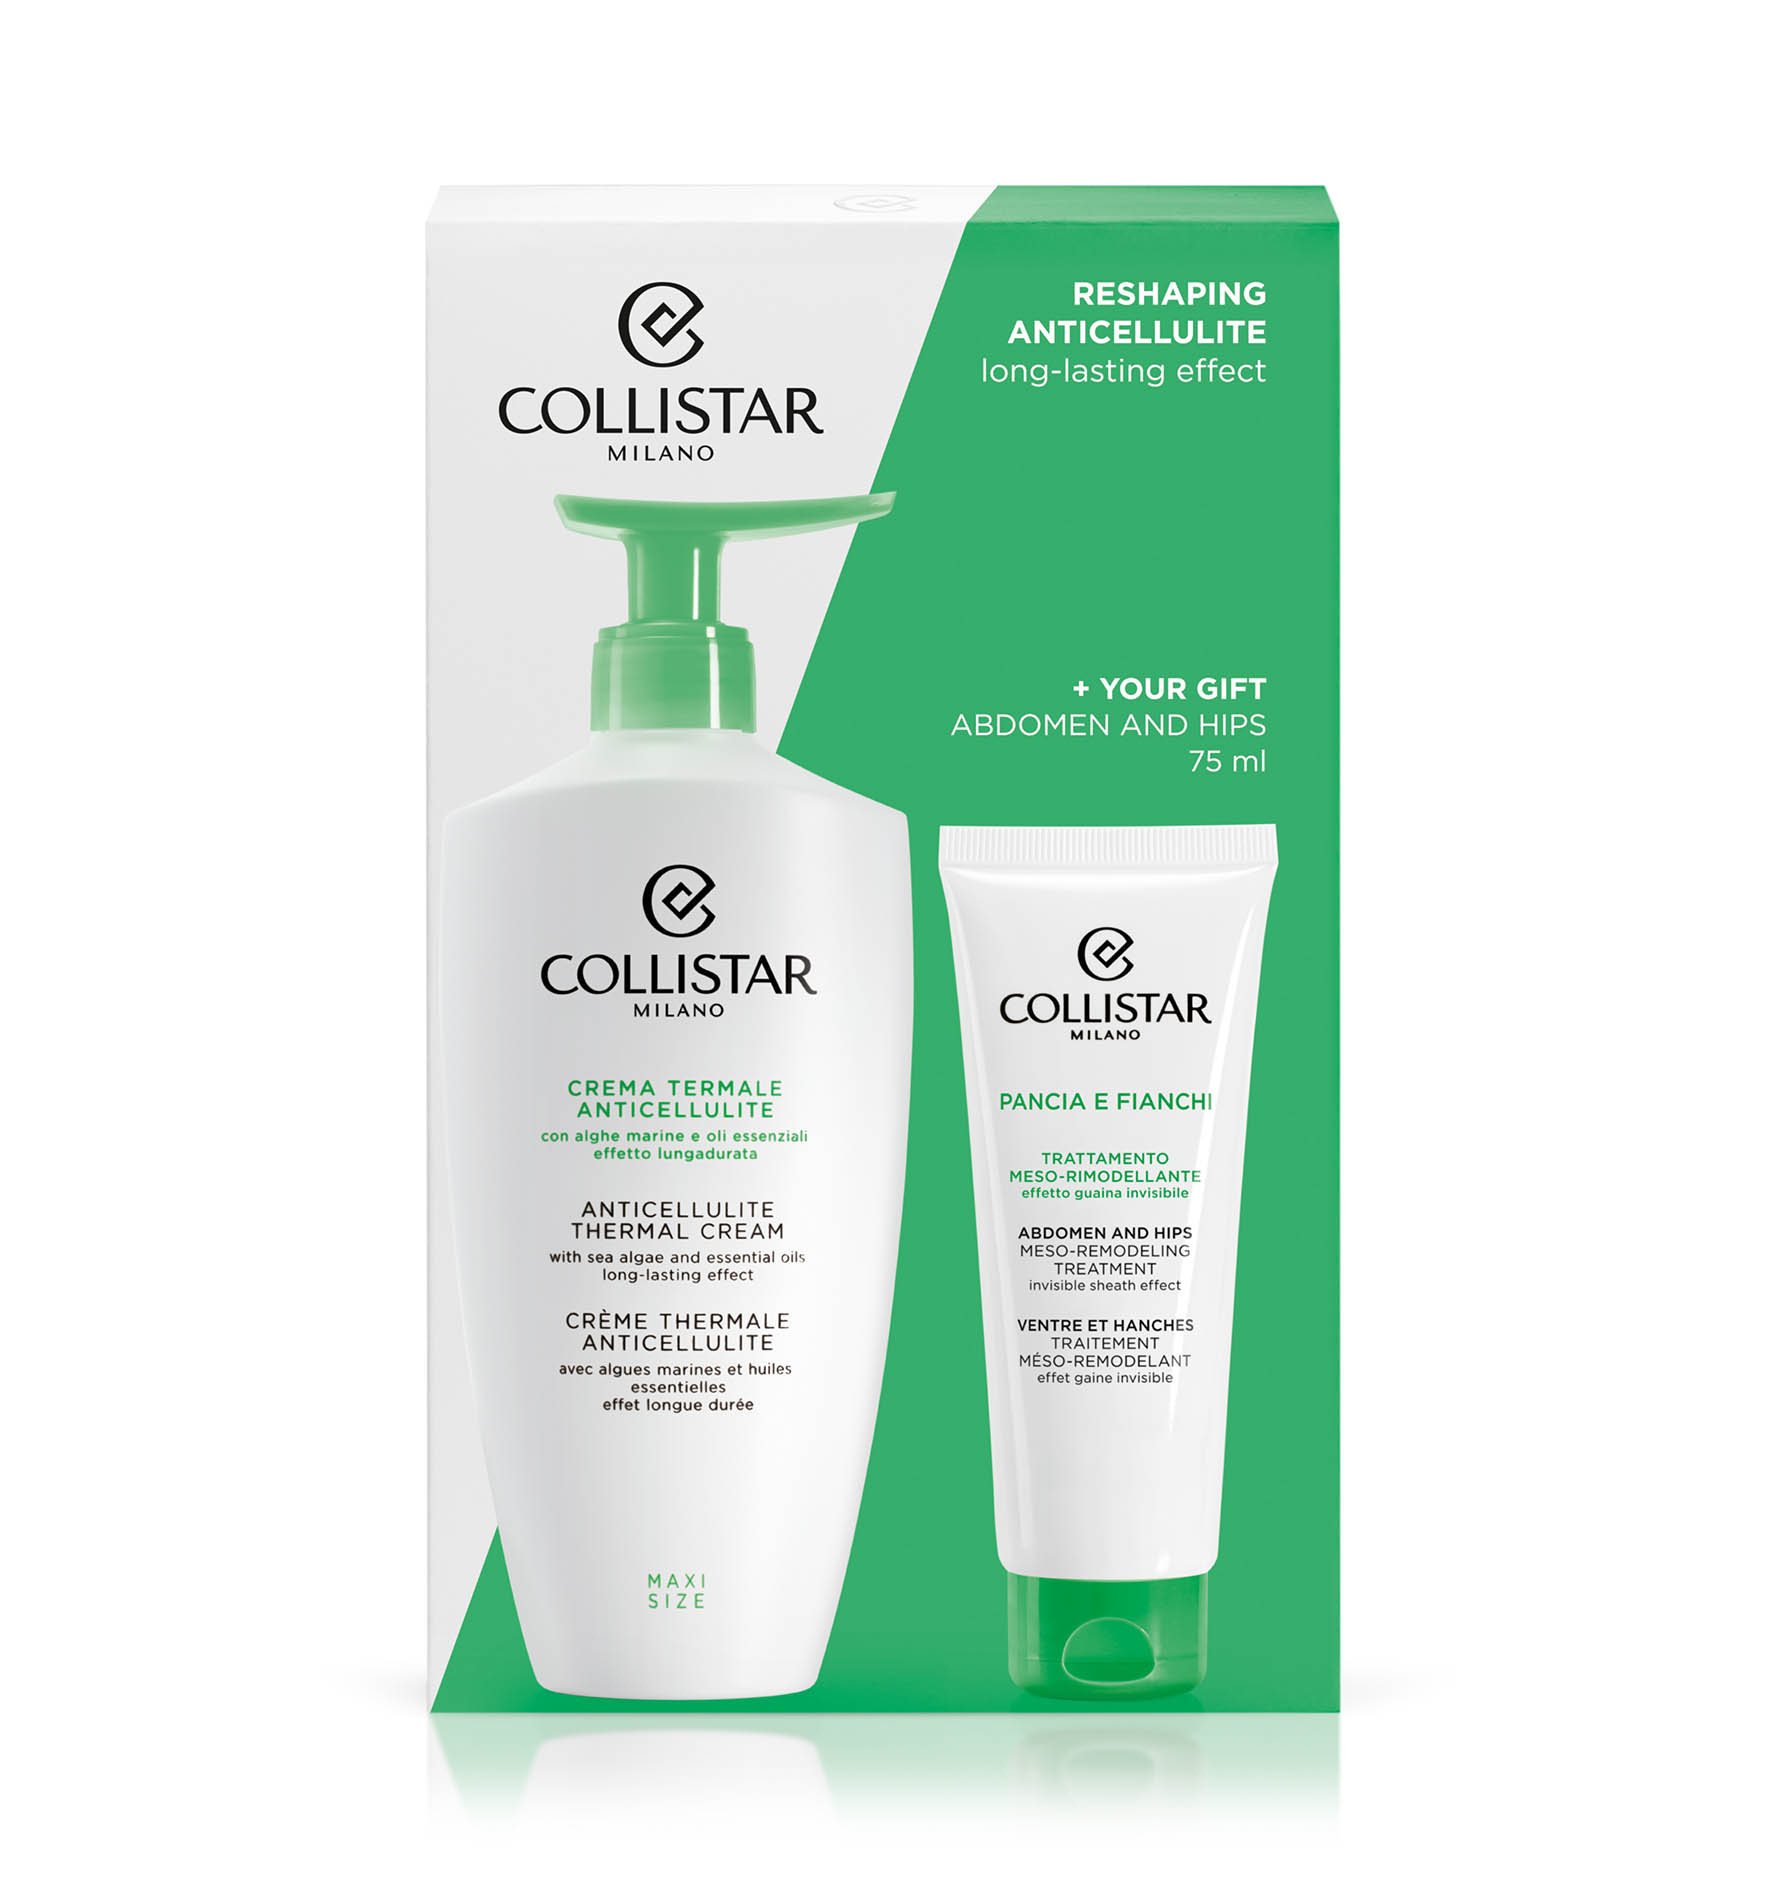 SET RESHAPING ANTICELLULITE long-lasting effect - NEW | Collistar - Shop Online Ufficiale